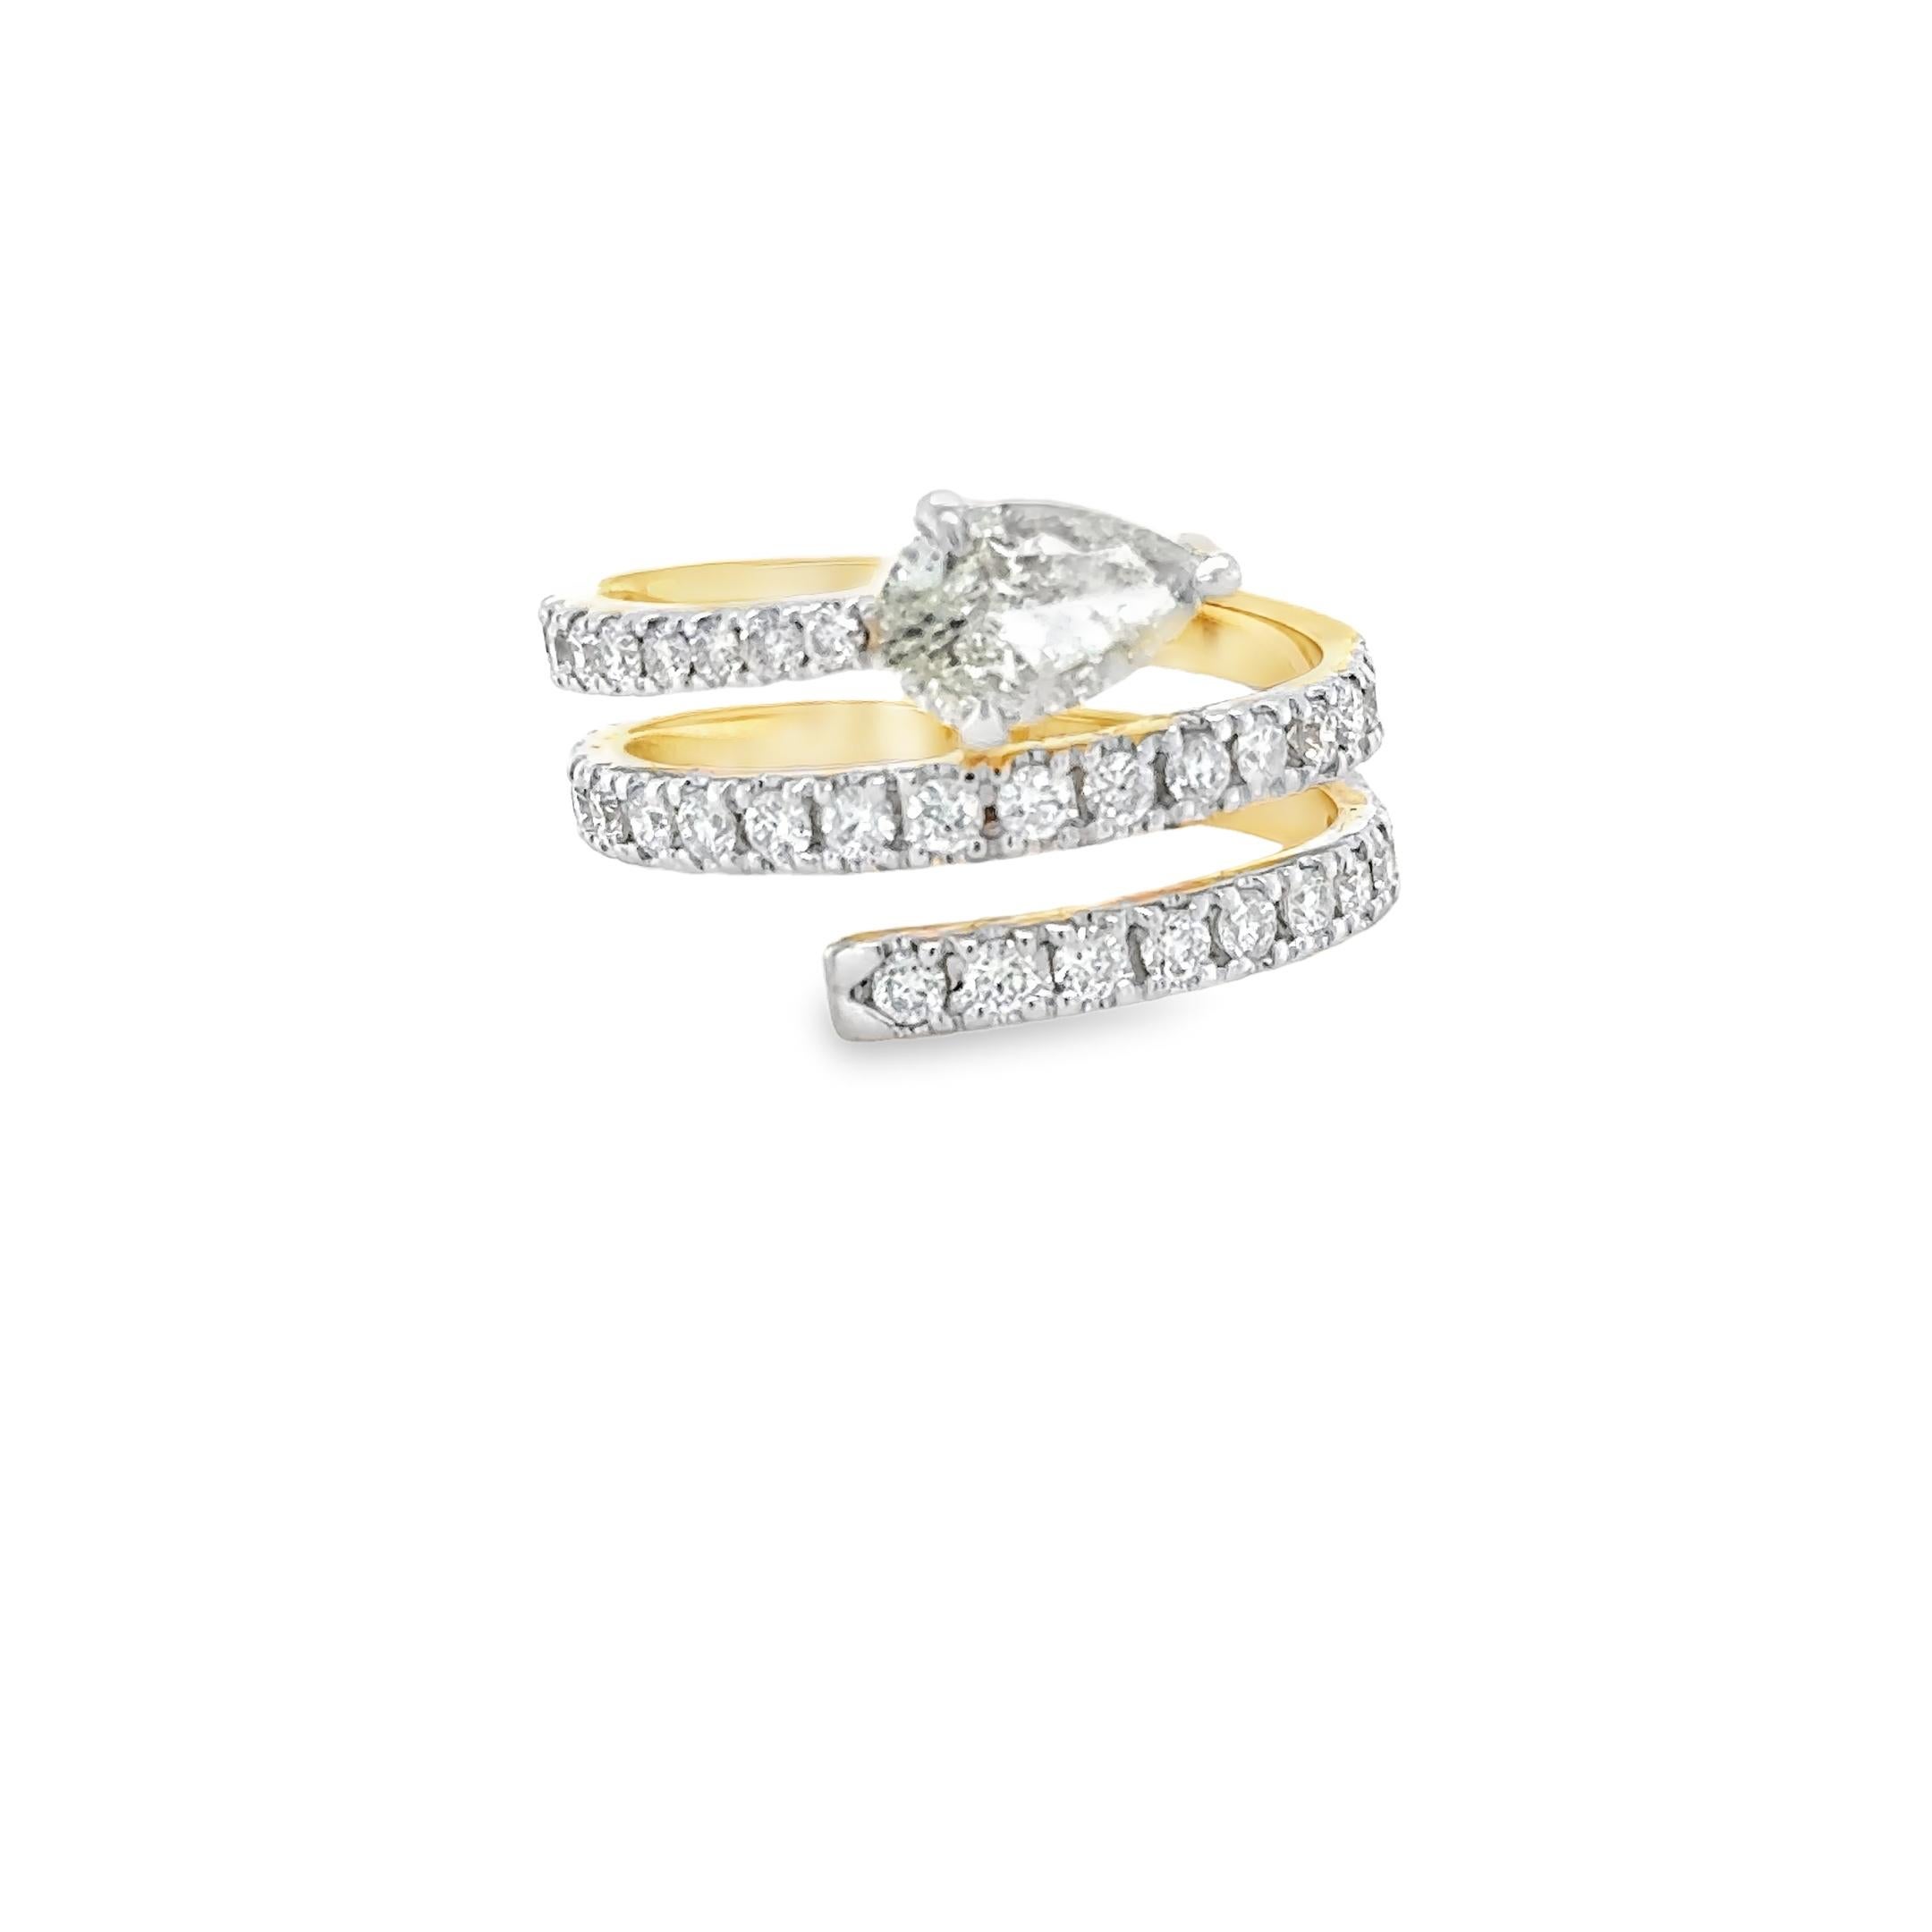 This exquisite 1.13 carat Pear shape diamond spiral cocktail ring features 18K White & Yellow Gold Pear-Shaped Diamond and is set with one Pear cut natural Diamond and thirty Seven round brilliant cut natural diamonds. 
This Beautiful Yellow